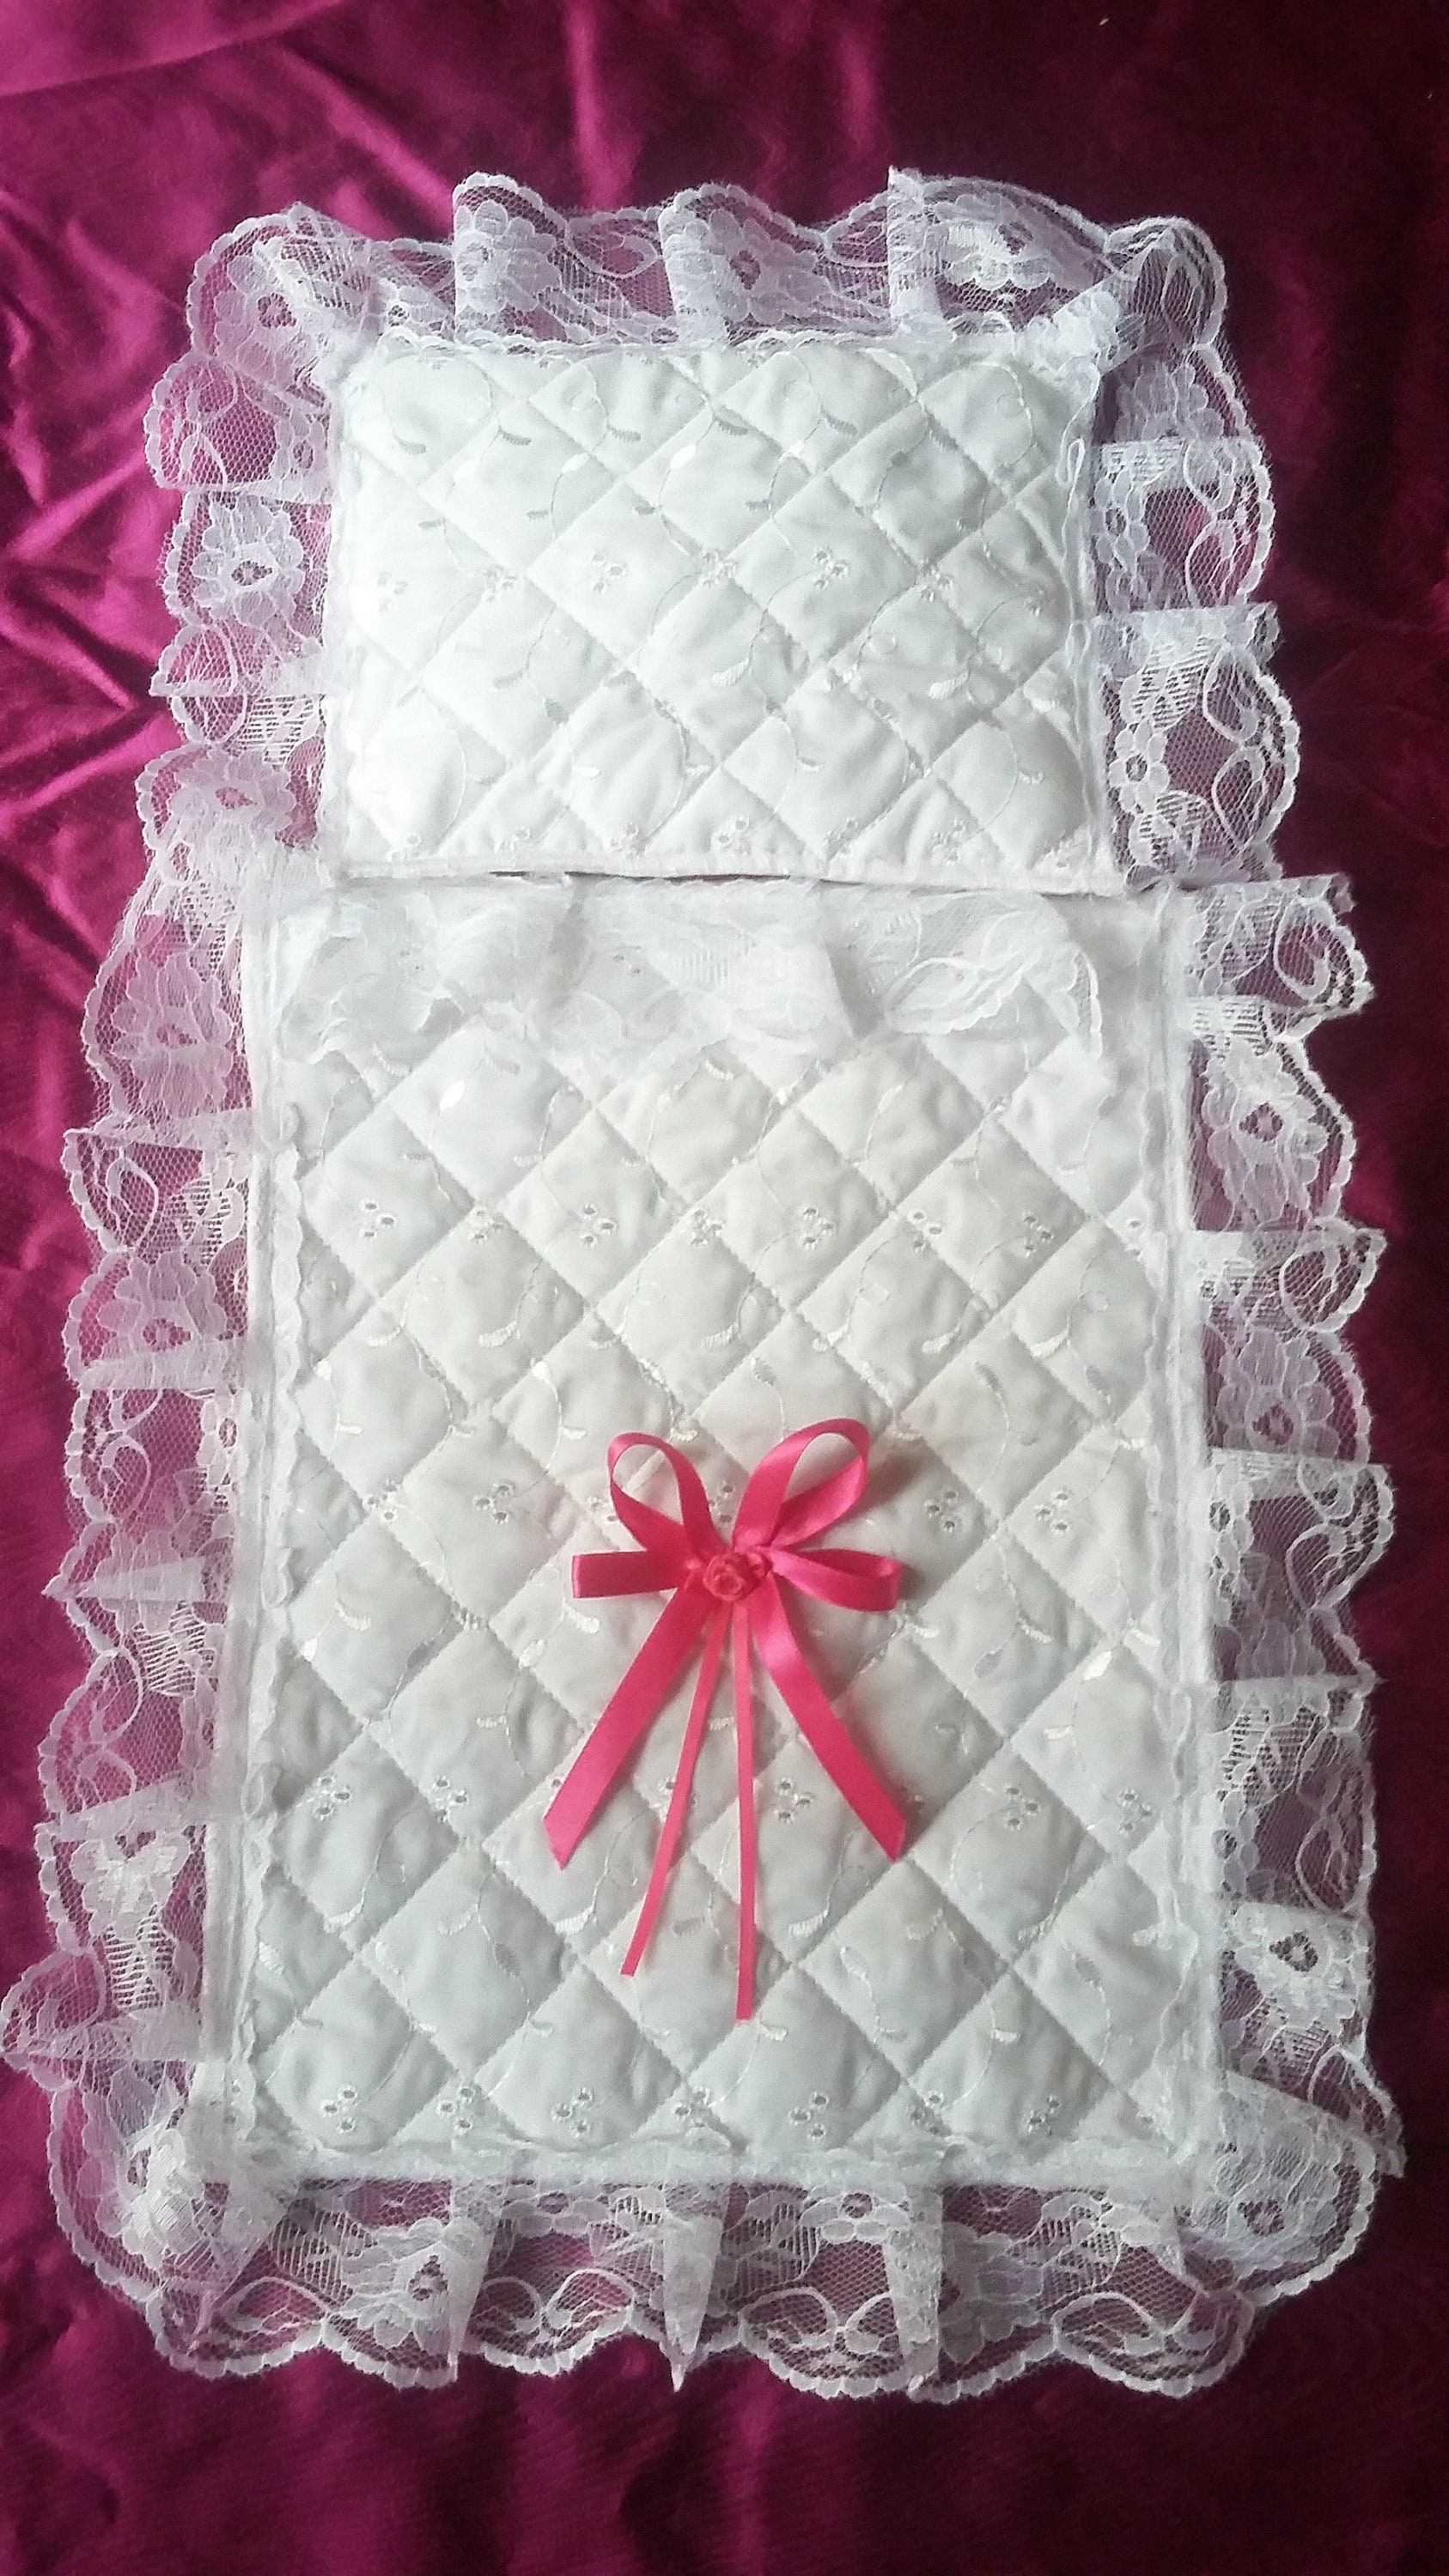 Dolls pram set 11 x 14 quilt quilted broderie anglaise | Etsy